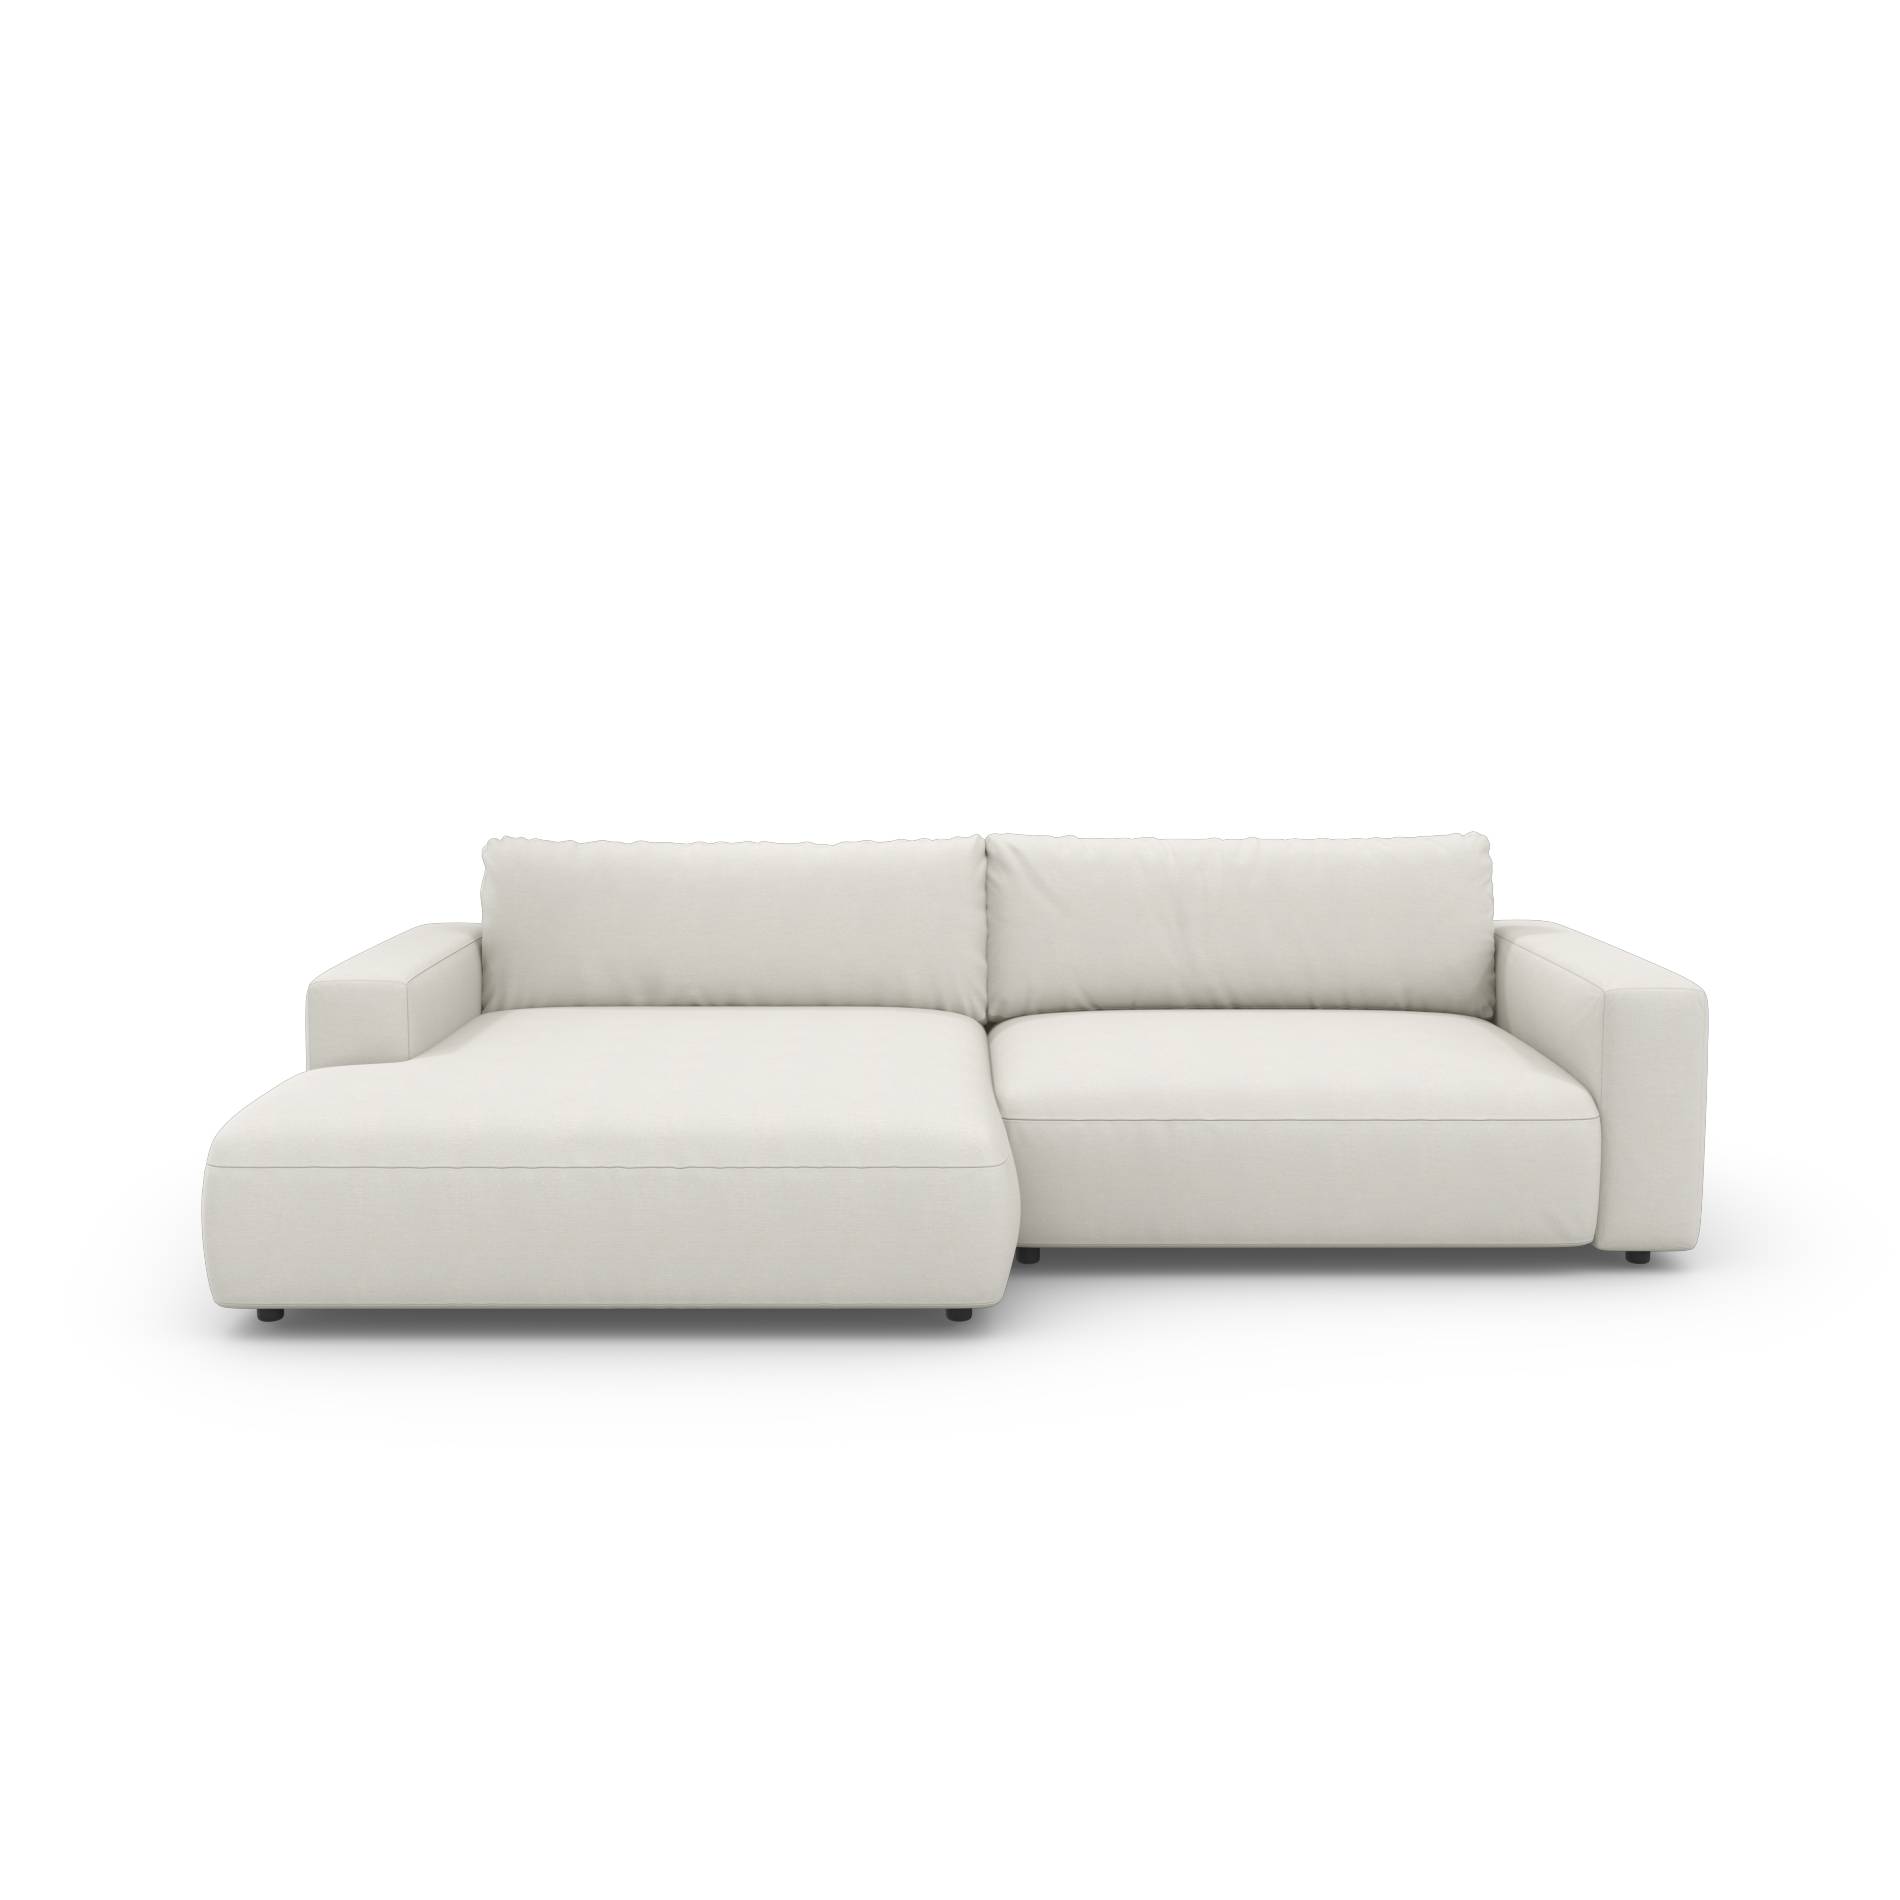 Sofa Lucia Musterring M by Gallery branded